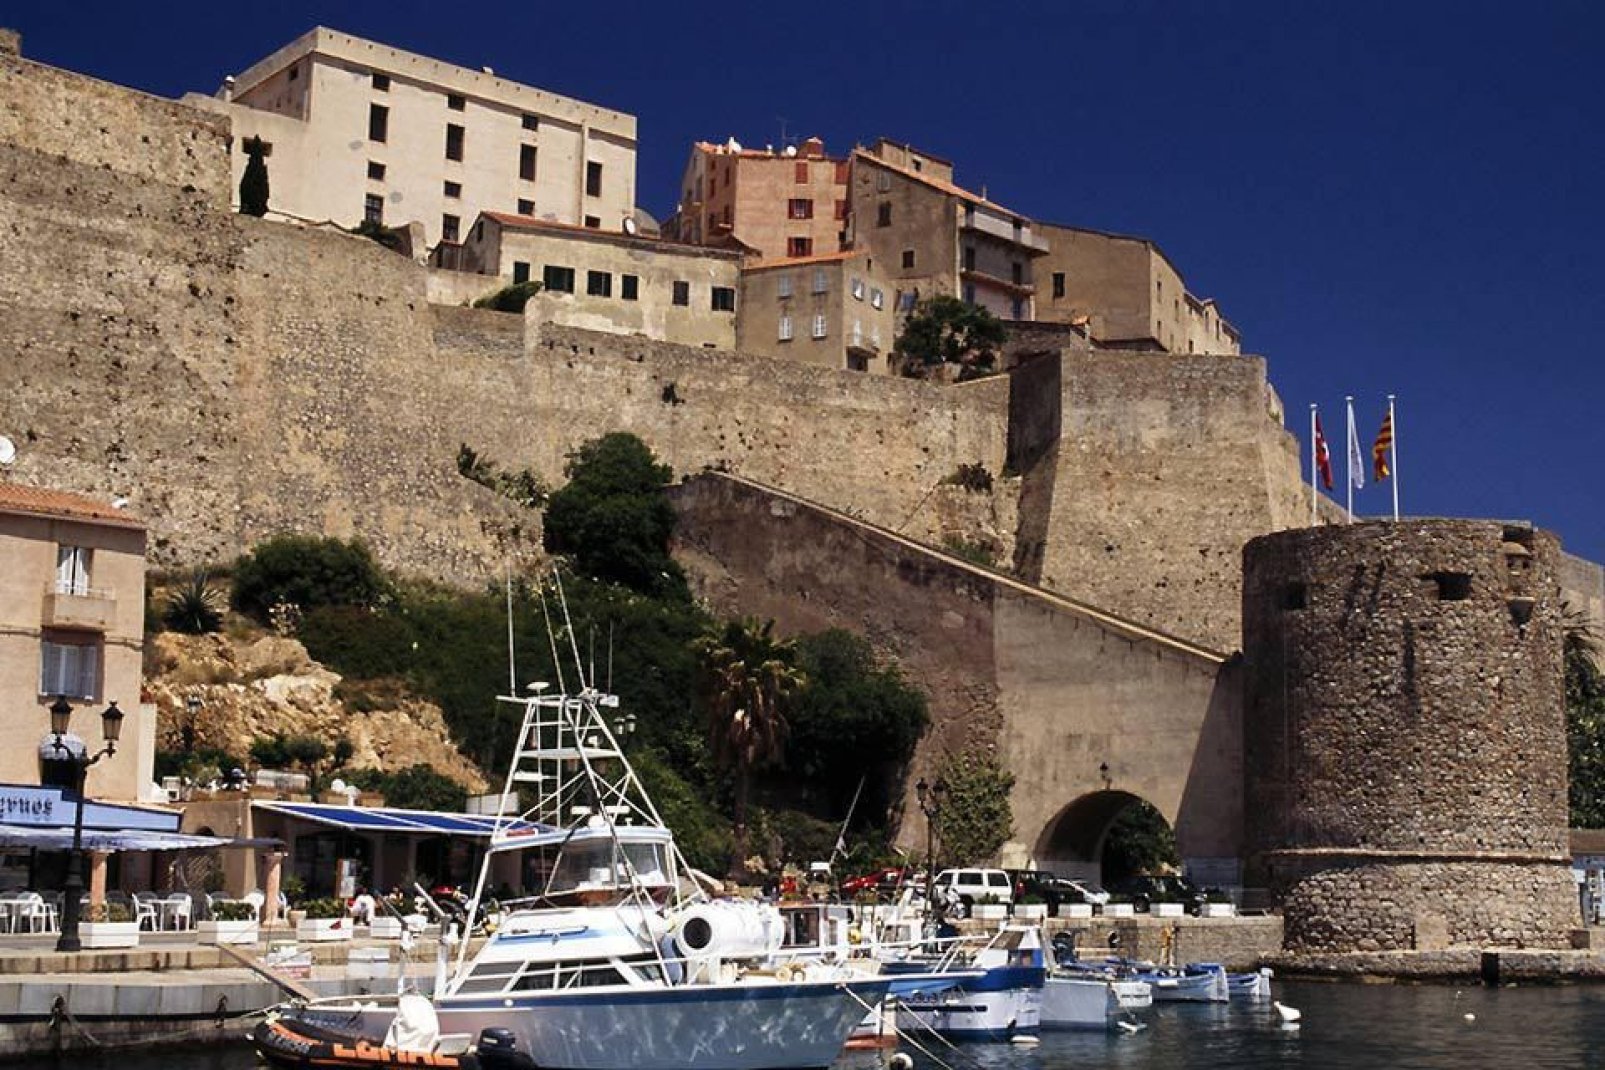 This citadel, built in the 15th century, symbolises the Genovese occupation that lasted 6 centuries.